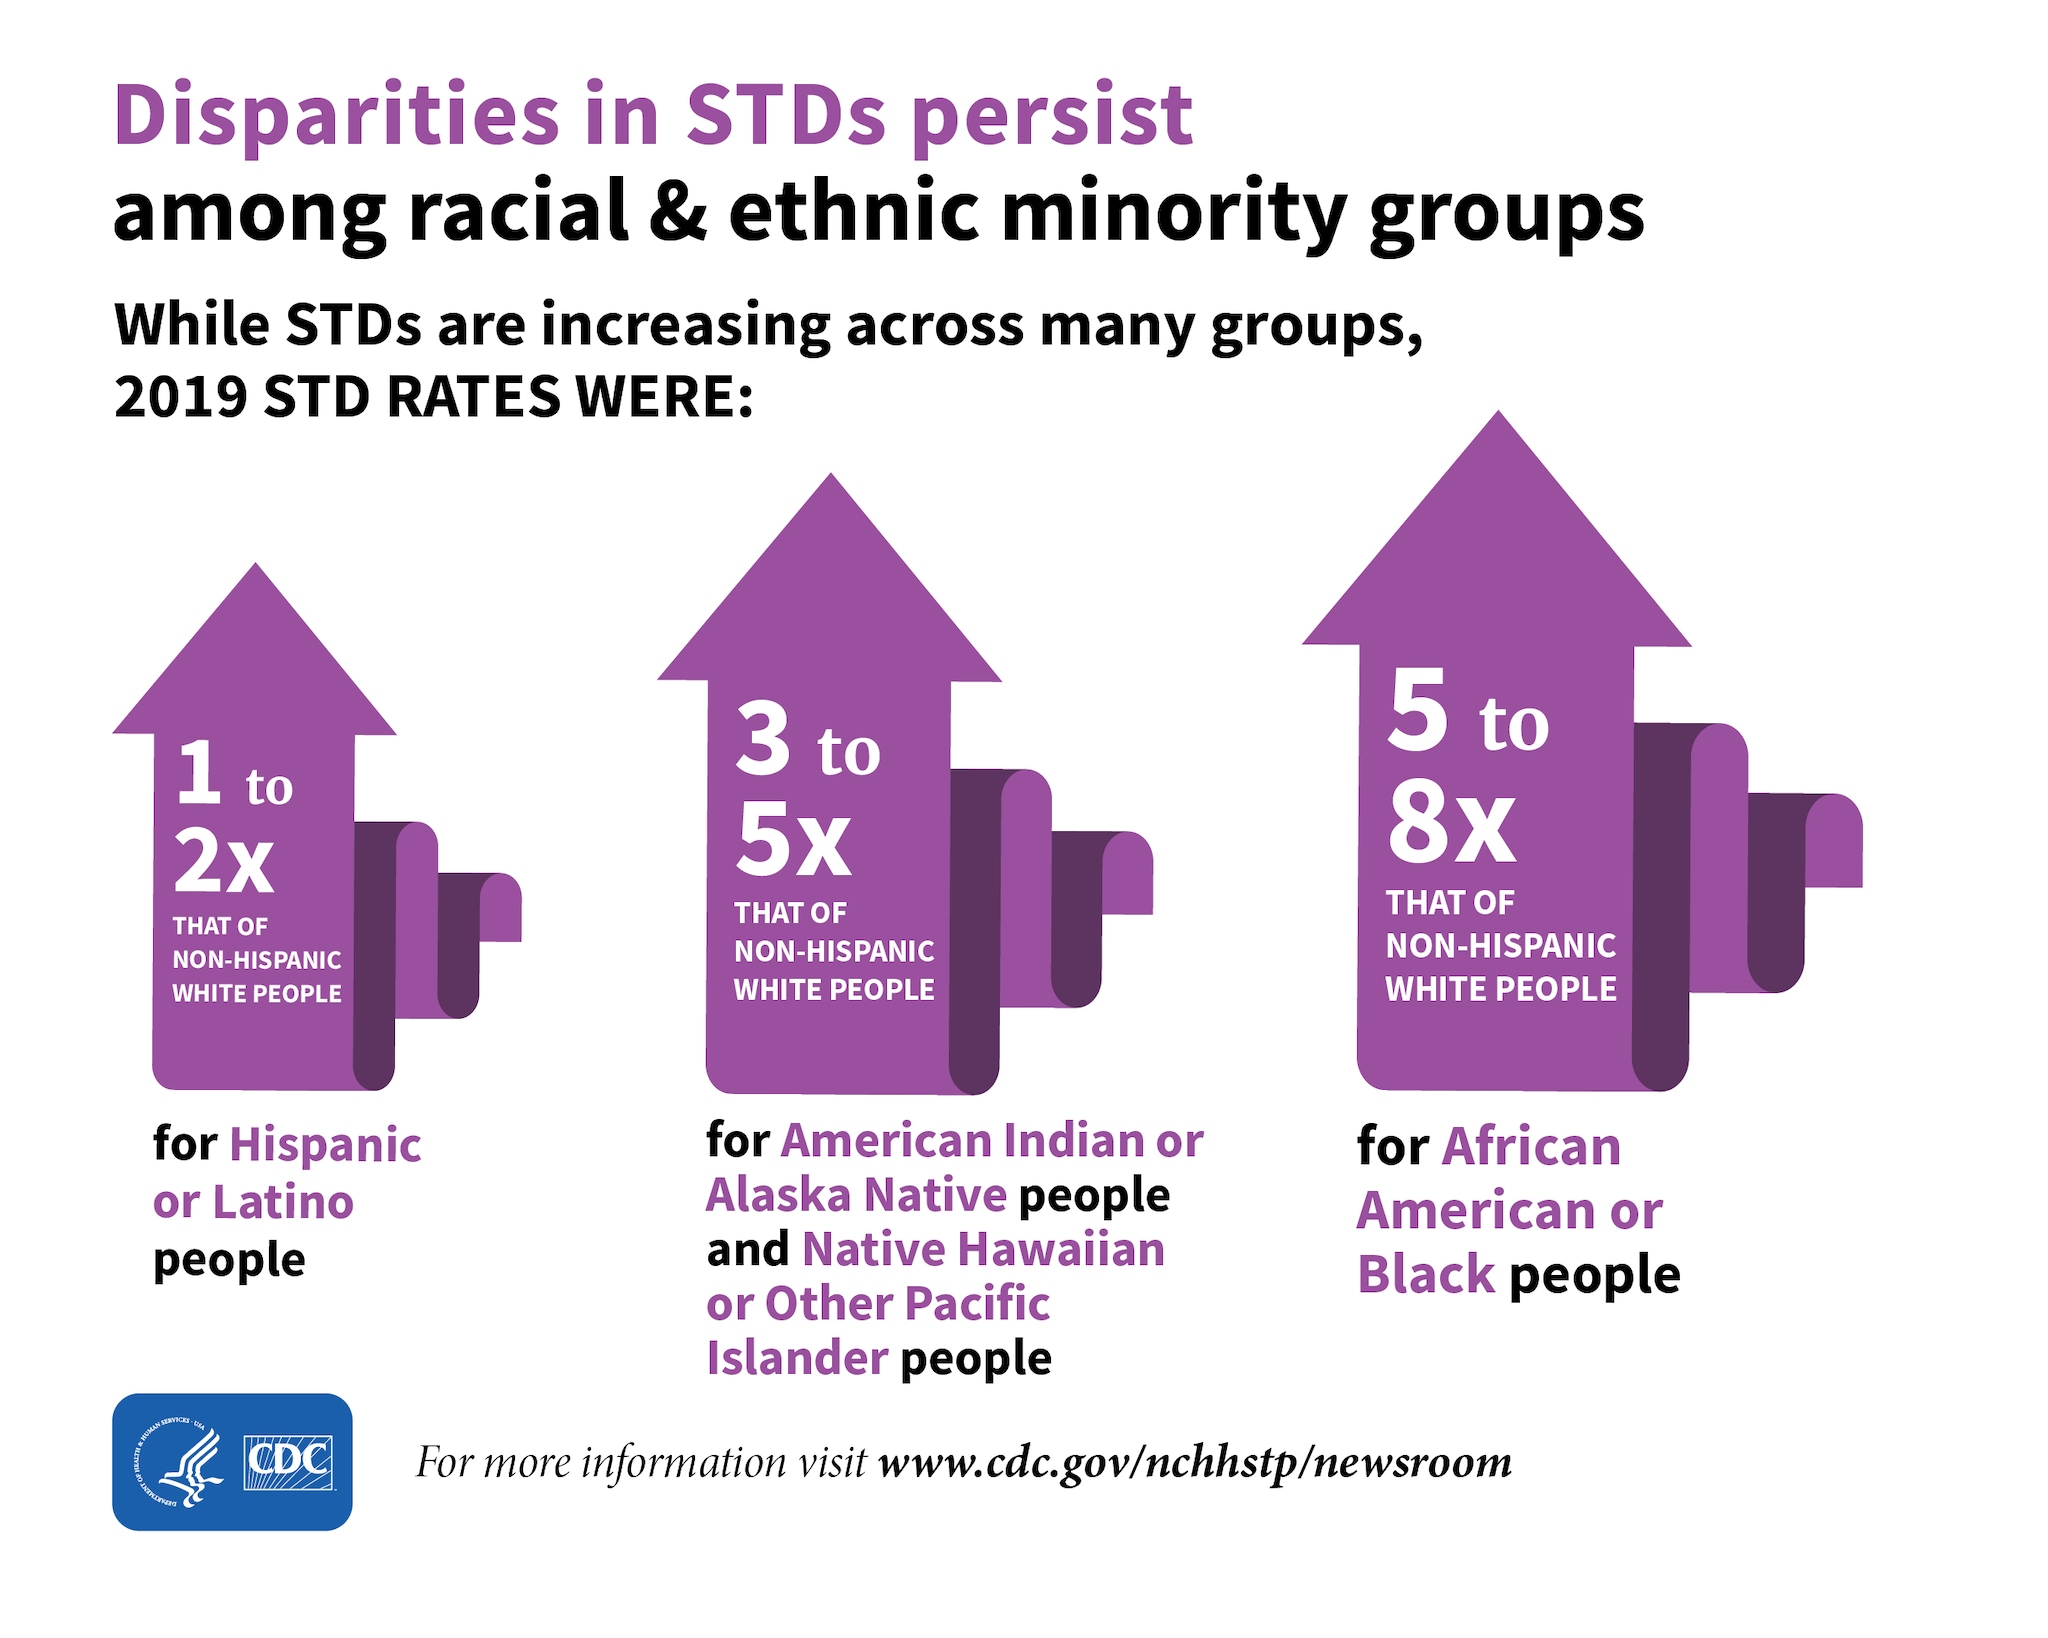 Disparities in STDs Persist among Racial and Ethnic Minority Groups  The graphic shows that while STDs are increasing across many groups, in 2019 disparities in STDs persisted among some racial and ethnic minority groups.   In 2019 STD rates for Hispanic or Latino people were 1-2 times that of non-Hispanic White people  In 2019 STD rates for American Indian or Alaska Native and Native Hawaiian or Other Pacific Islander people were 3-5 times that of non-Hispanic White people   In 2019 STD rates for African American or Black people were 5-8 times that of non-Hispanic White people